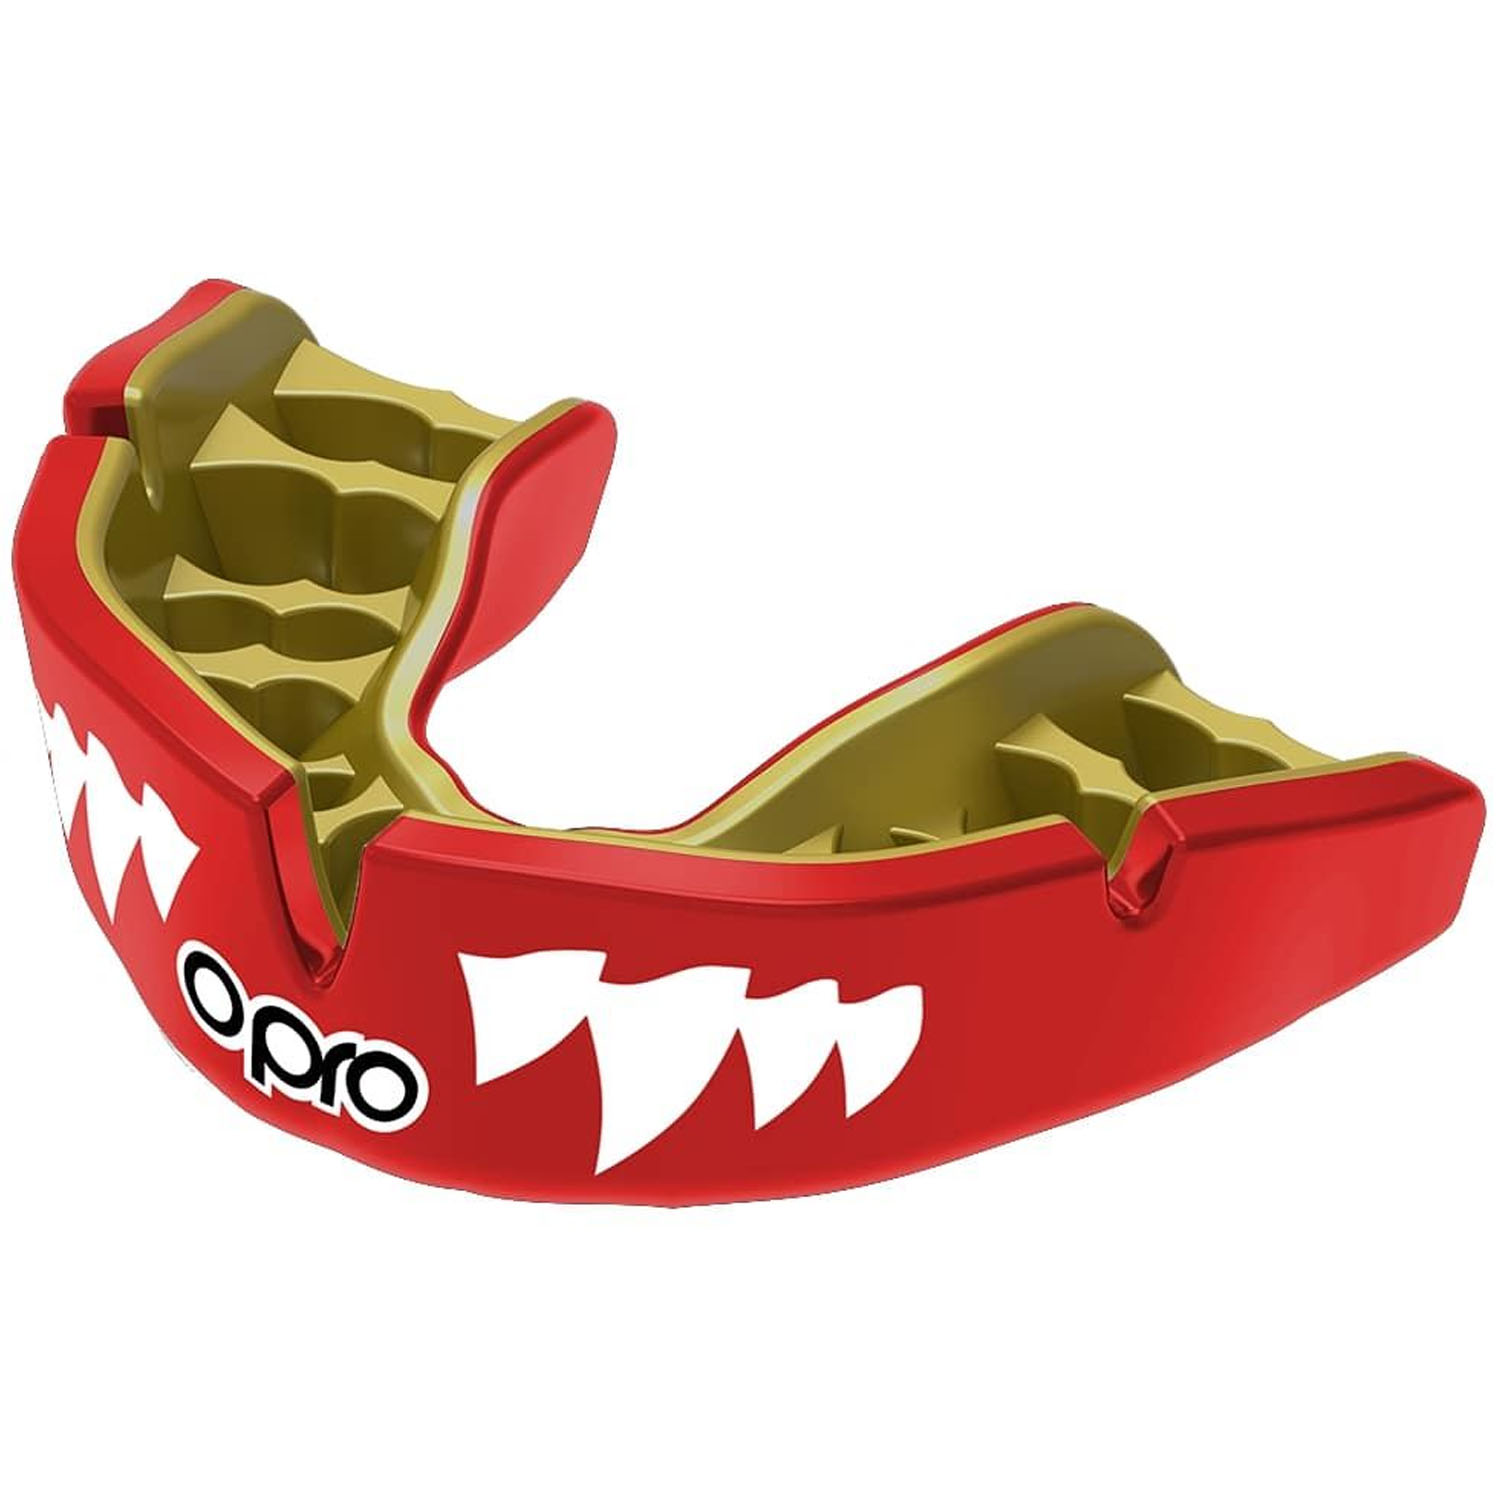 OPRO Mundschutz, Instant Custom Fit, Jaws, rot-gold